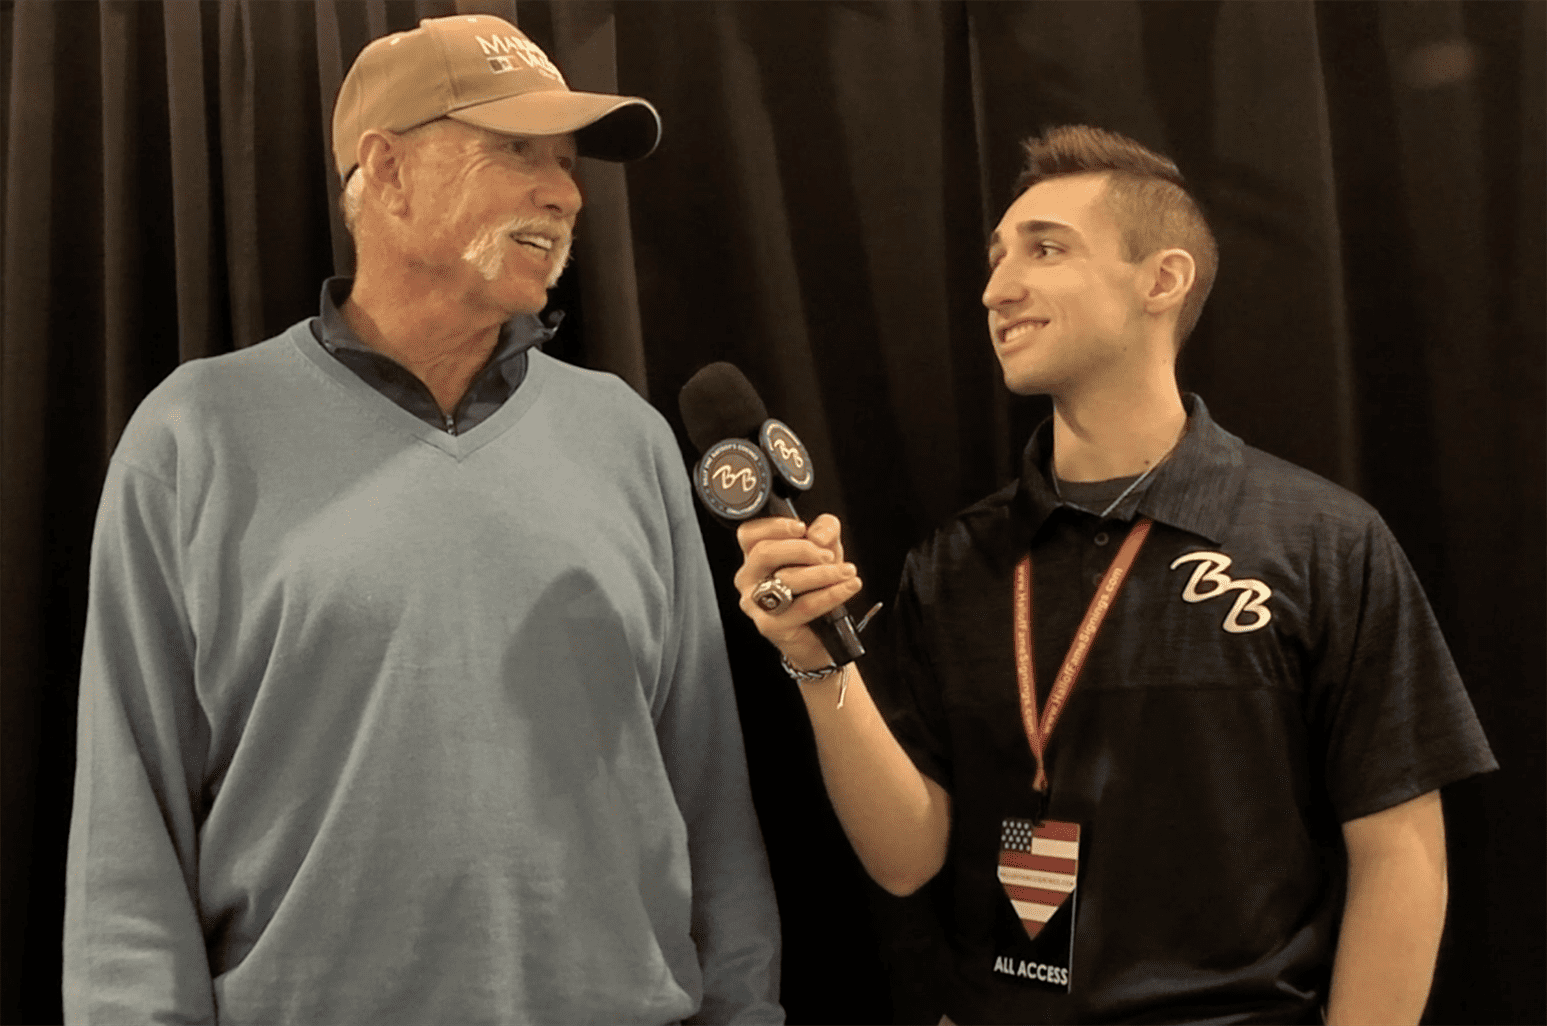 Pinckney interviewing former New York Yankees and Hall of Fame pitcher Rich "Goose" Gossage. Photo courtesy of Billy Pinckney